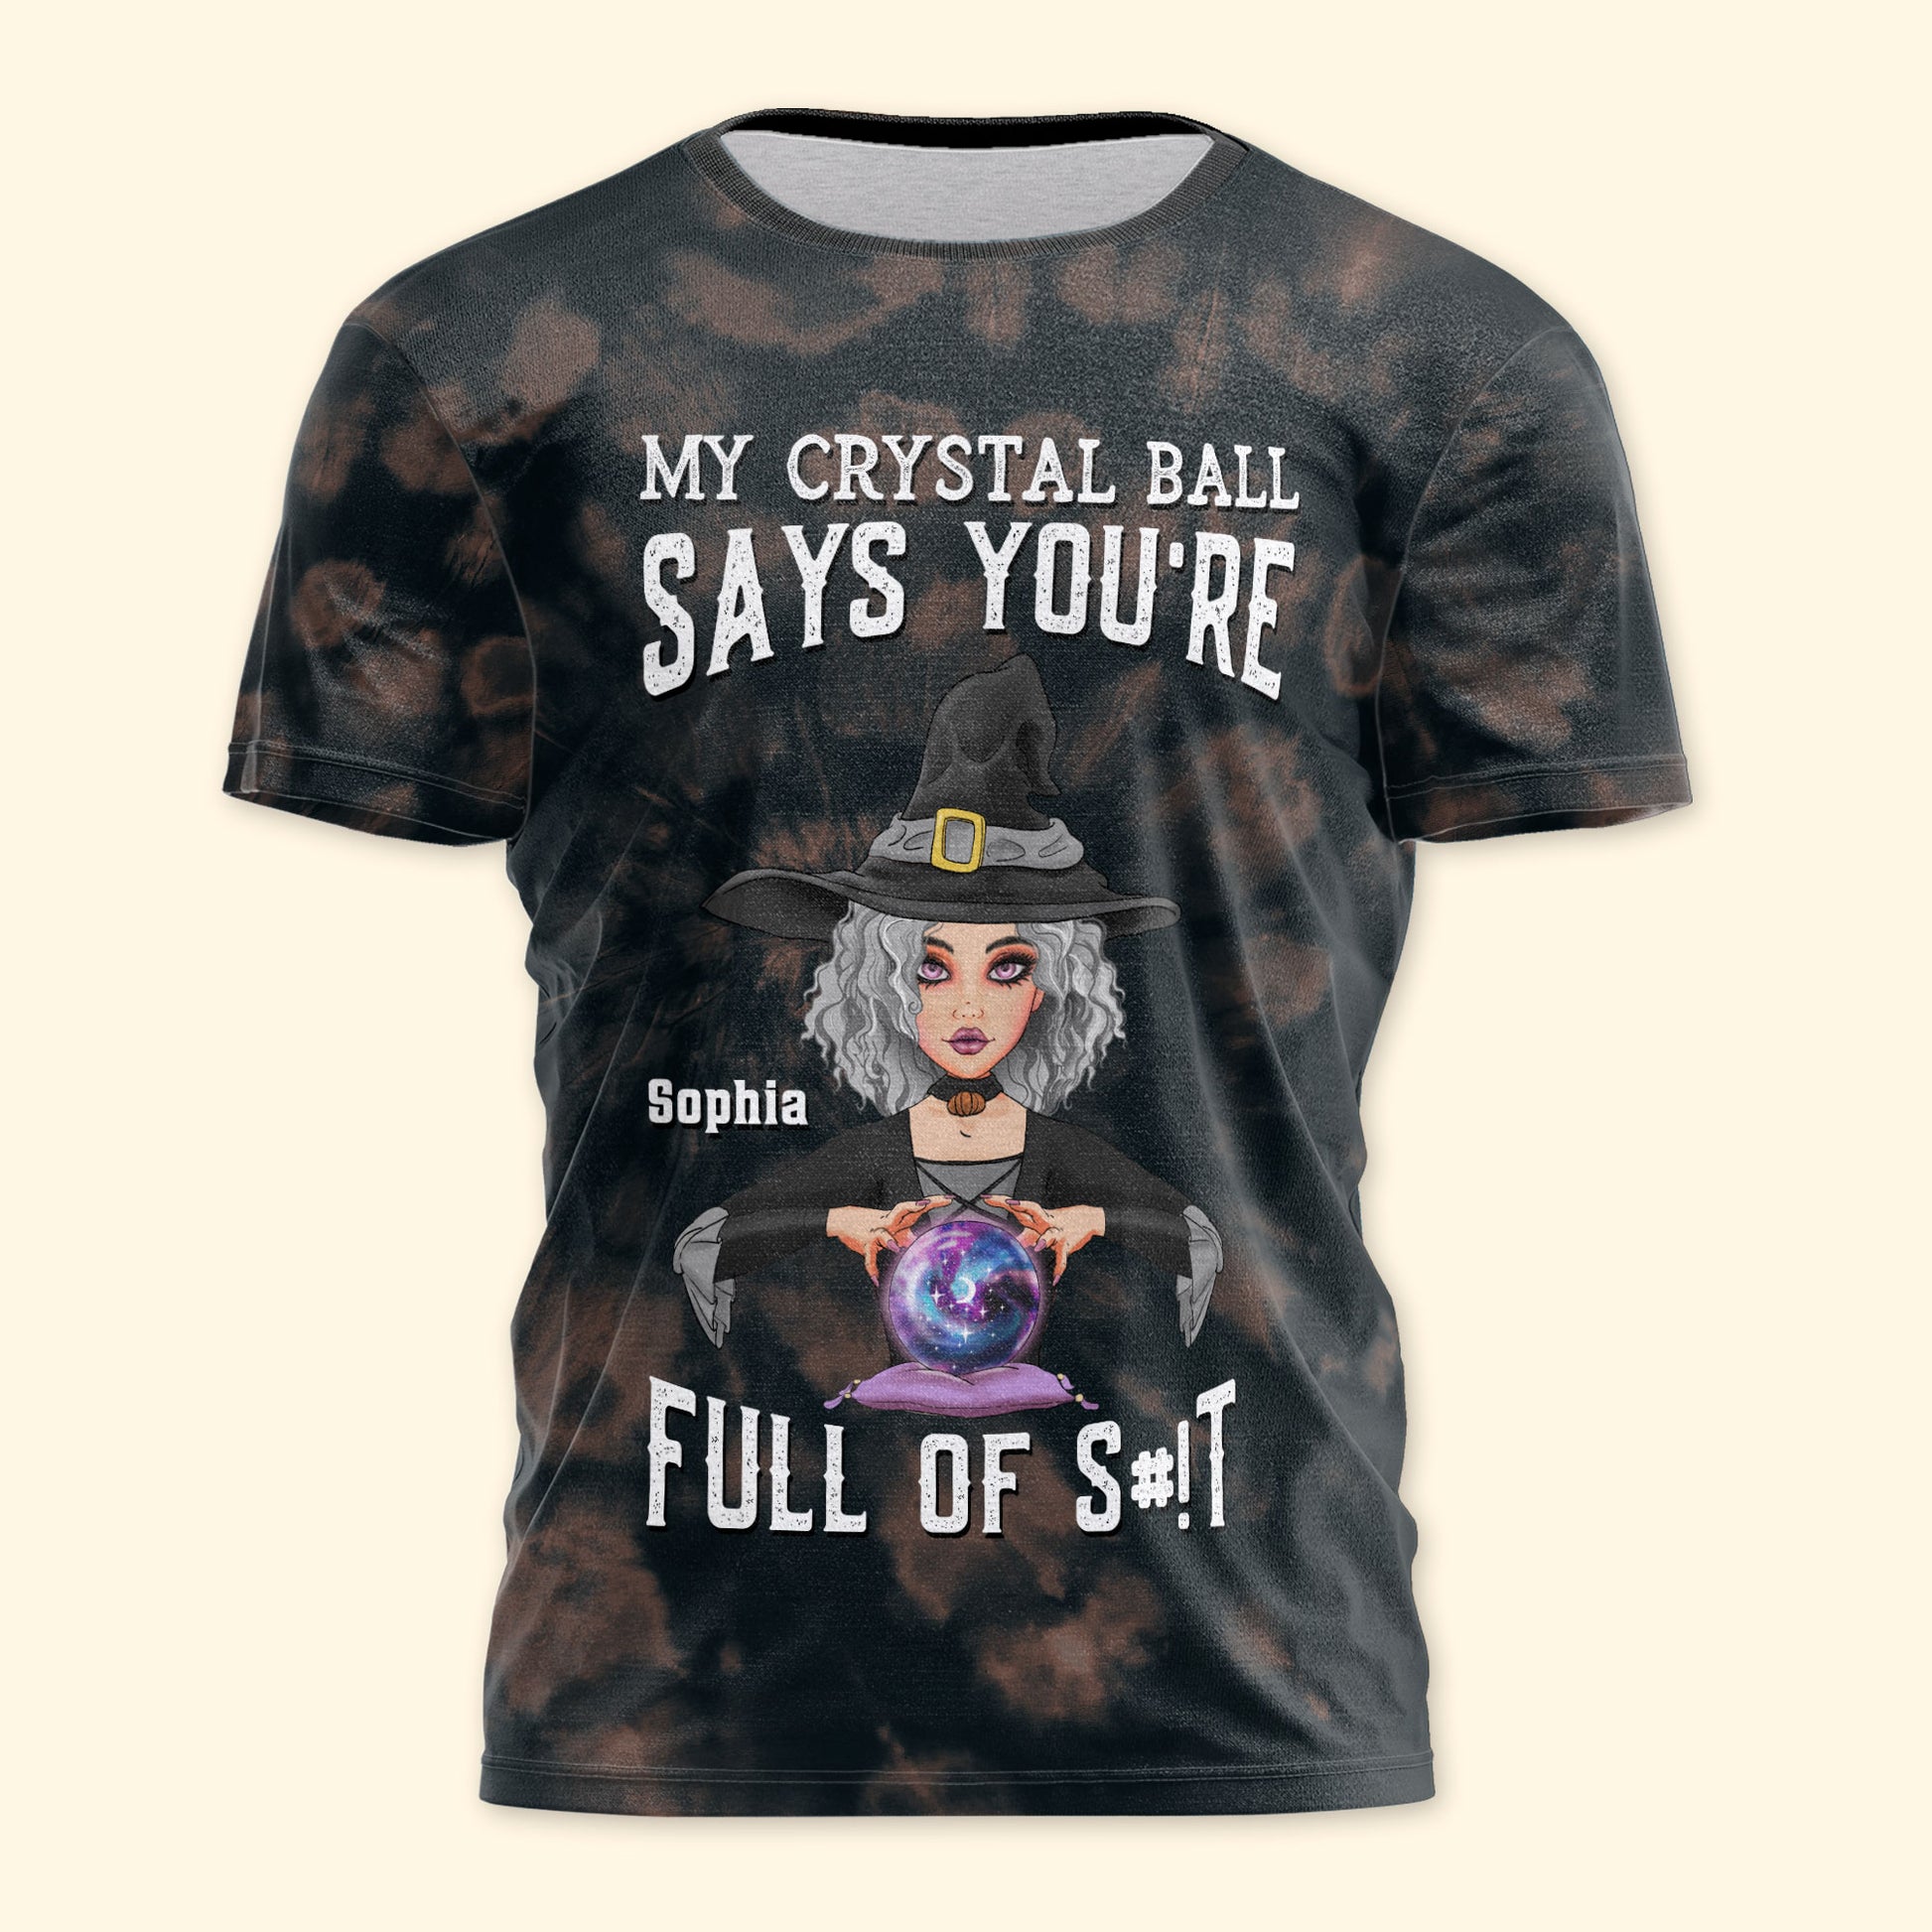 My Crystal Ball Says You're Full Of S#!t - Personalized Tie Dye 3D All Over Printed Shirt - Funny Halloween Gift For Witch, Fortune Teller